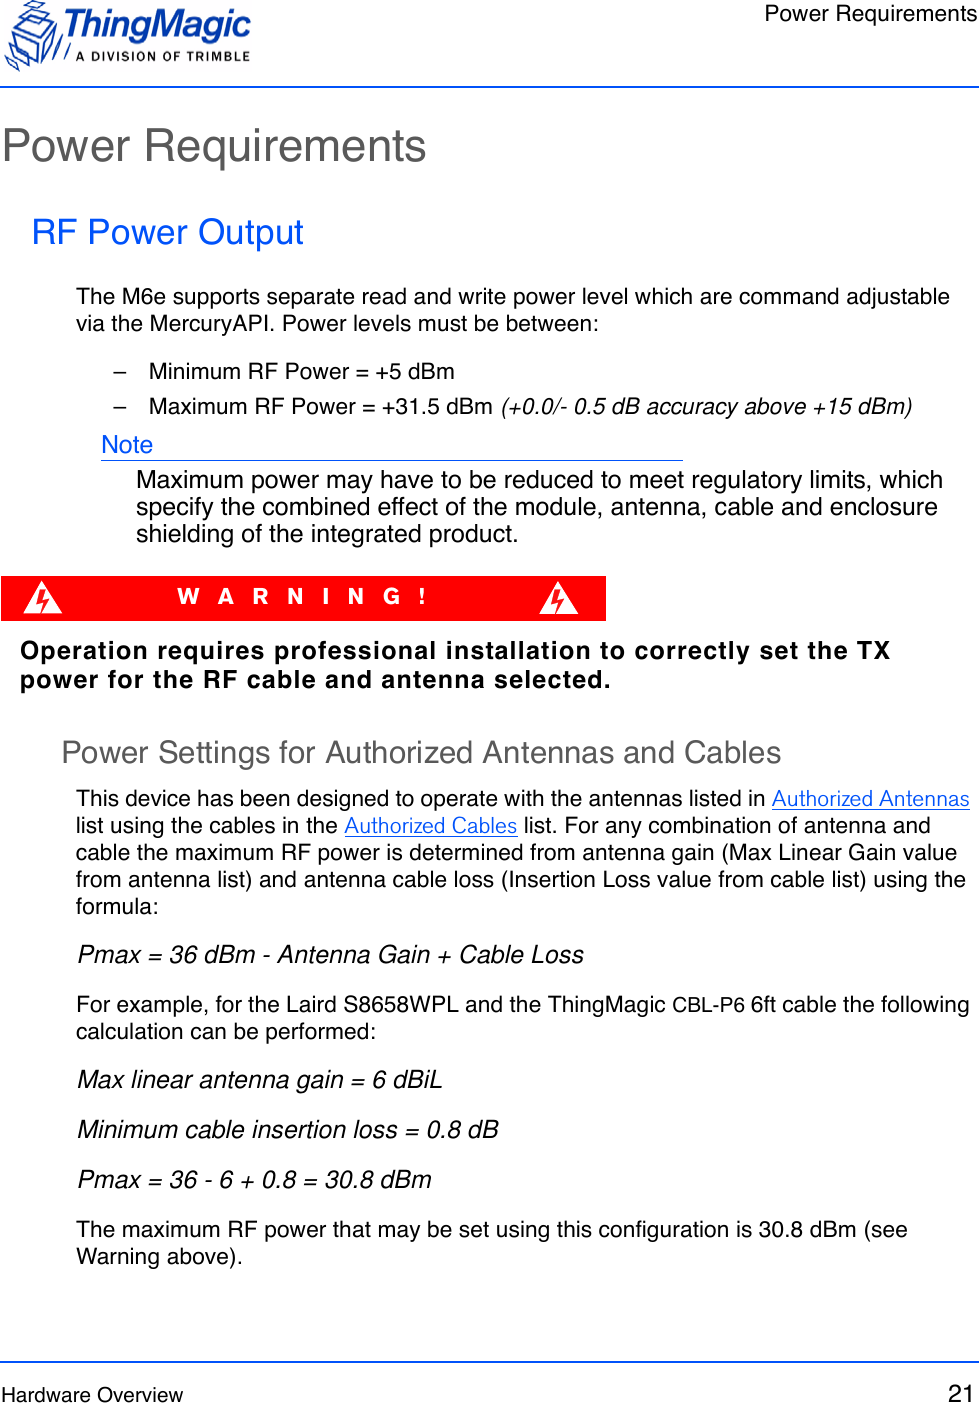 Power RequirementsHardware Overview 21Power RequirementsRF Power OutputThe M6e supports separate read and write power level which are command adjustable via the MercuryAPI. Power levels must be between:–   Minimum RF Power = +5 dBm–   Maximum RF Power = +31.5 dBm (+0.0/- 0.5 dB accuracy above +15 dBm)NoteMaximum power may have to be reduced to meet regulatory limits, which specify the combined effect of the module, antenna, cable and enclosure shielding of the integrated product. WARNING!Operation requires professional installation to correctly set the TX power for the RF cable and antenna selected.Power Settings for Authorized Antennas and CablesThis device has been designed to operate with the antennas listed in Authorized Antennas list using the cables in the Authorized Cables list. For any combination of antenna and cable the maximum RF power is determined from antenna gain (Max Linear Gain value from antenna list) and antenna cable loss (Insertion Loss value from cable list) using the formula:Pmax = 36 dBm - Antenna Gain + Cable LossFor example, for the Laird S8658WPL and the ThingMagic CBL-P6 6ft cable the following calculation can be performed:Max linear antenna gain = 6 dBiLMinimum cable insertion loss = 0.8 dBPmax = 36 - 6 + 0.8 = 30.8 dBmThe maximum RF power that may be set using this configuration is 30.8 dBm (see Warning above).